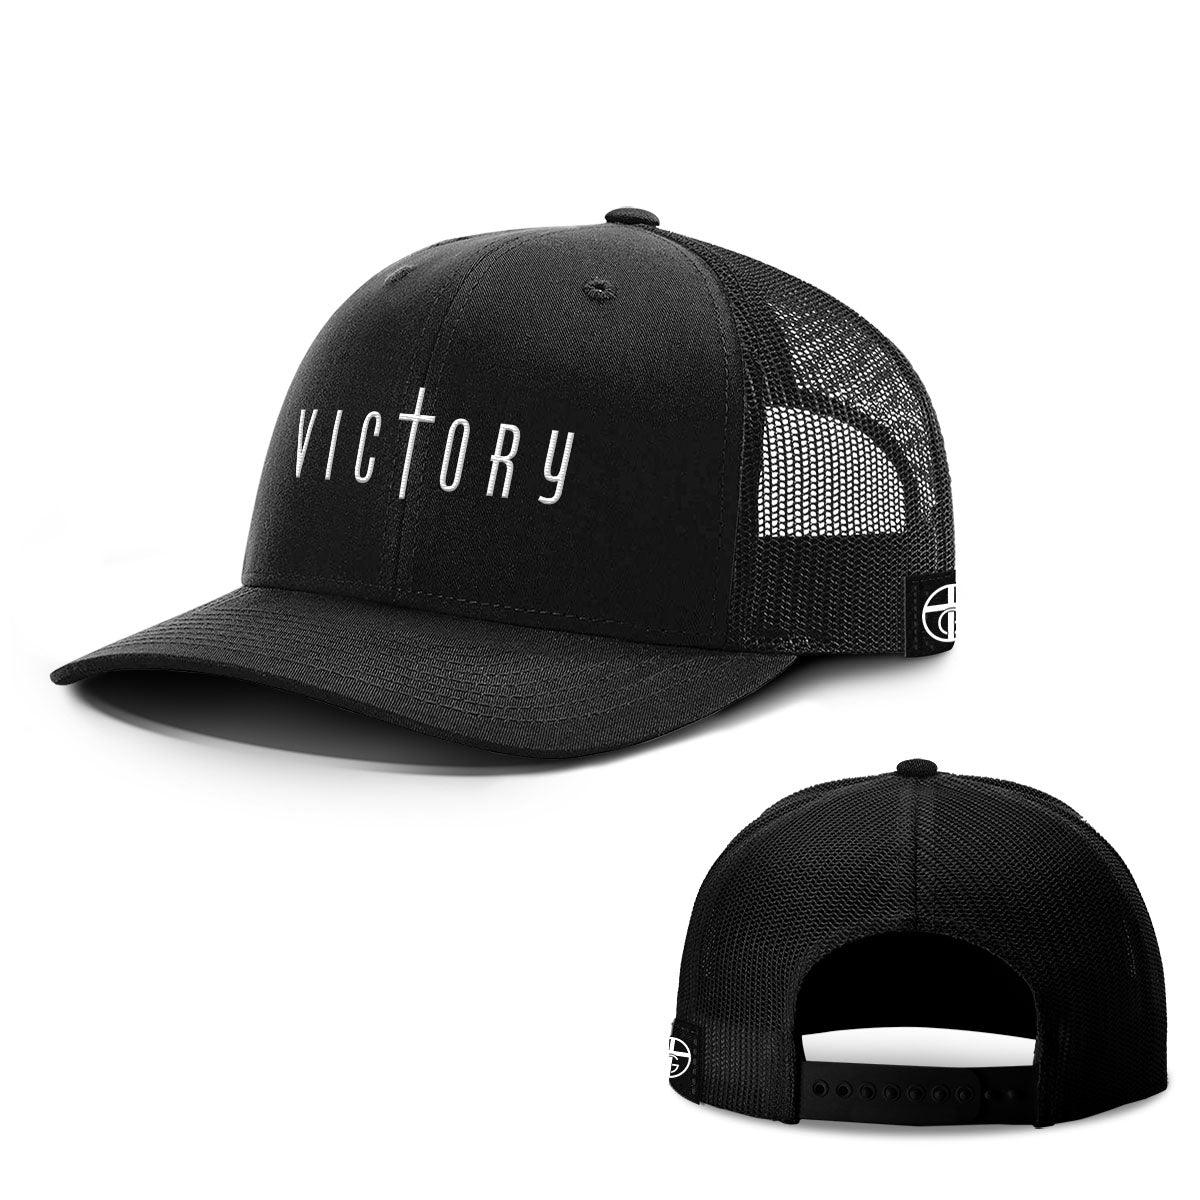 Victory Hats - Our True God